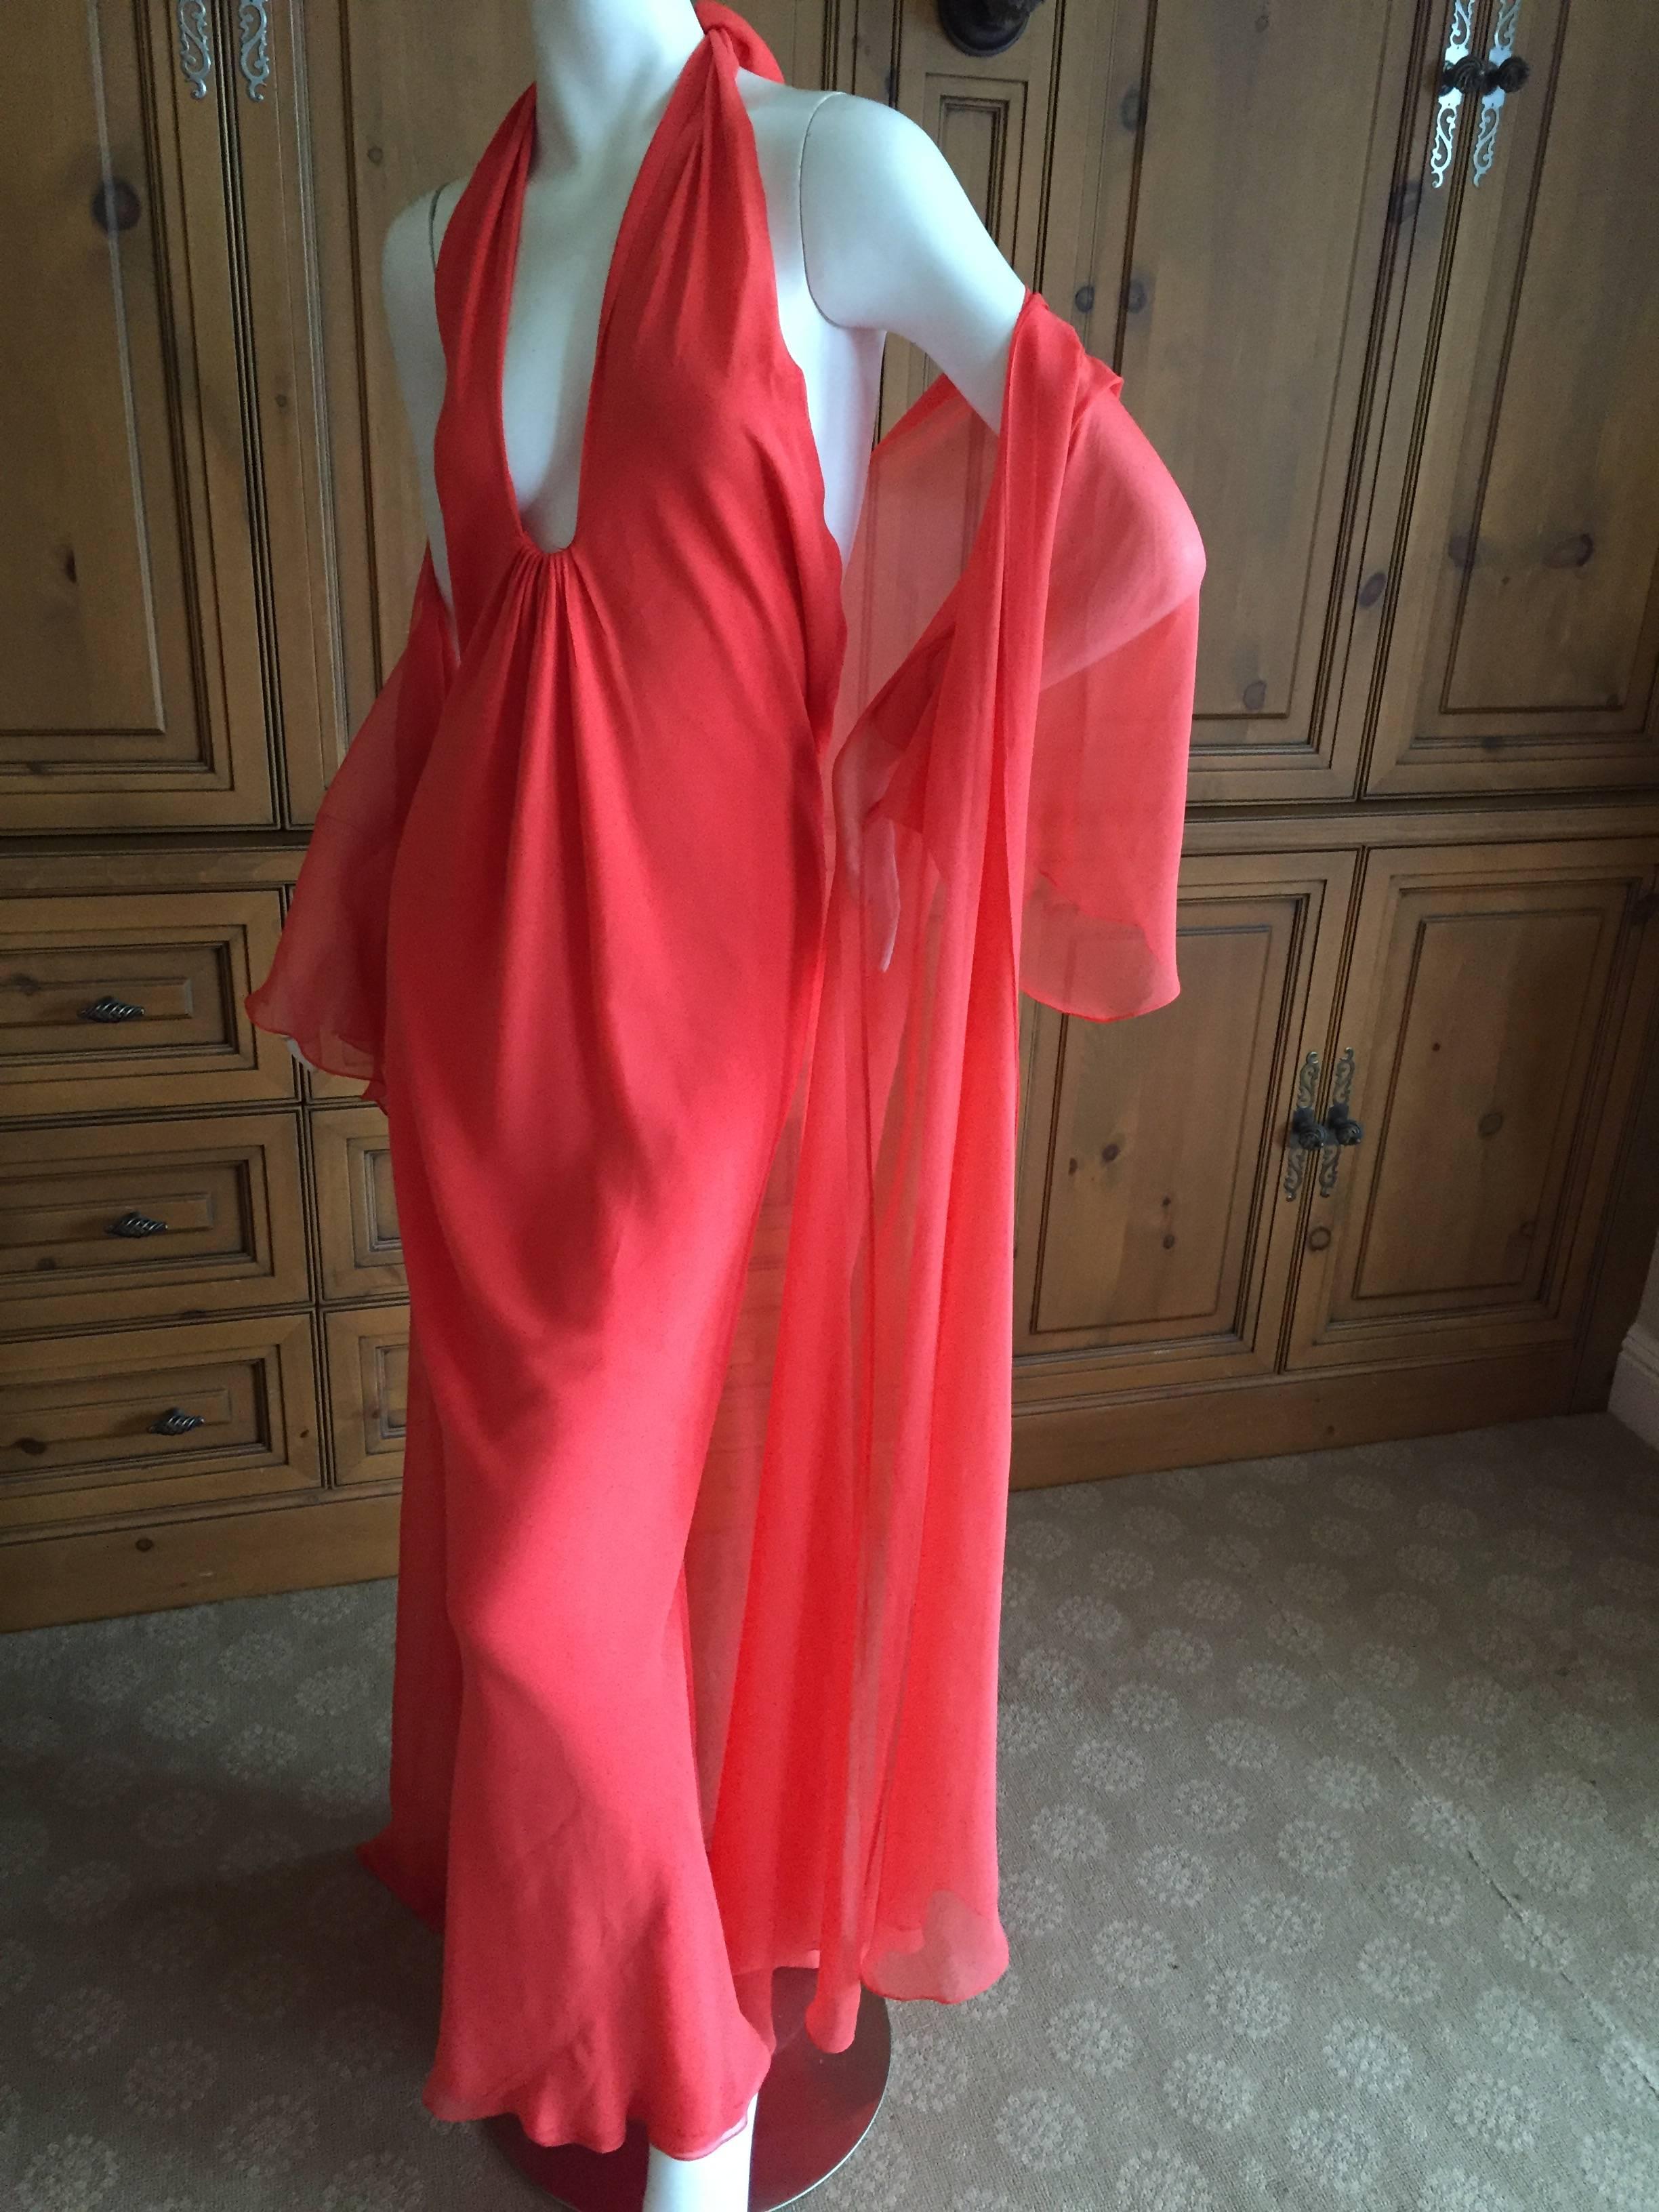 Halston 1970's Backless Low Cut Silk Chiffon Evening Dress & Coat.
In Tangerine silk chiffon, this is an amazing piece.
The dress ties in theh back and can be adjusted to wear very low, or less revealing, up higher around the neck.
Bust